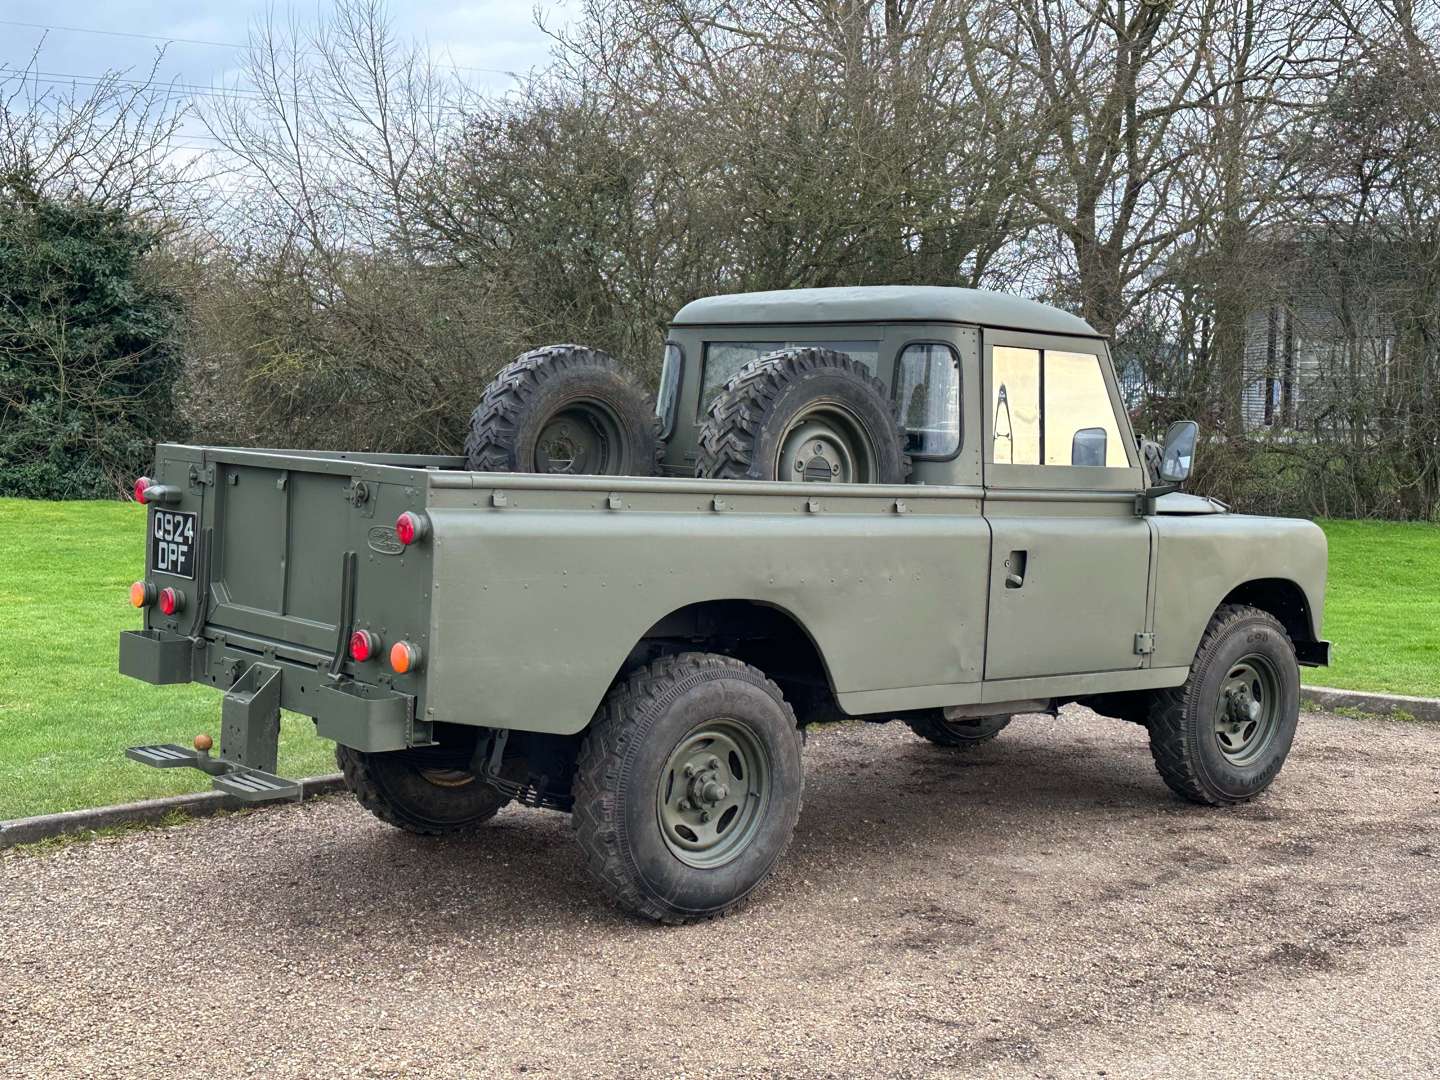 1992 LAND ROVER SERIES III PICK-UP - Image 7 of 25